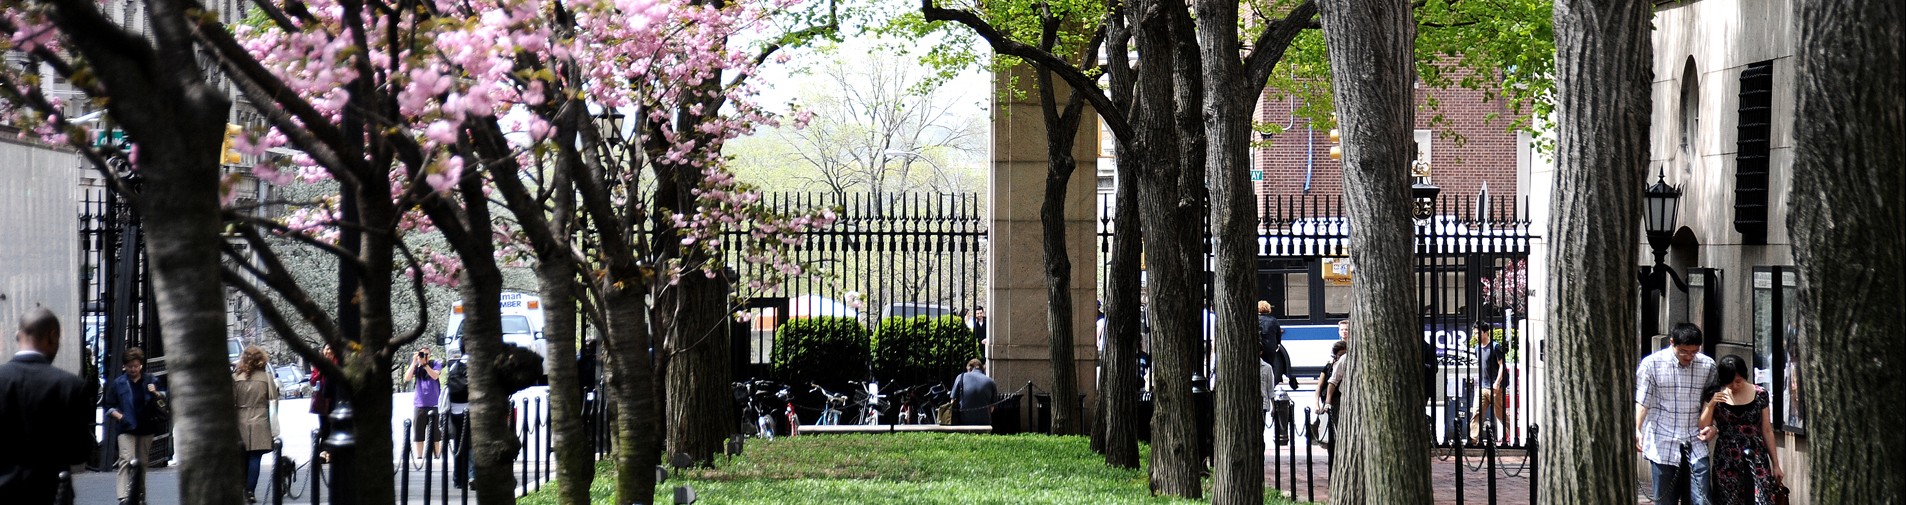 A view of College Walk during the springtime with some Cherry Blossom trees in bloom.